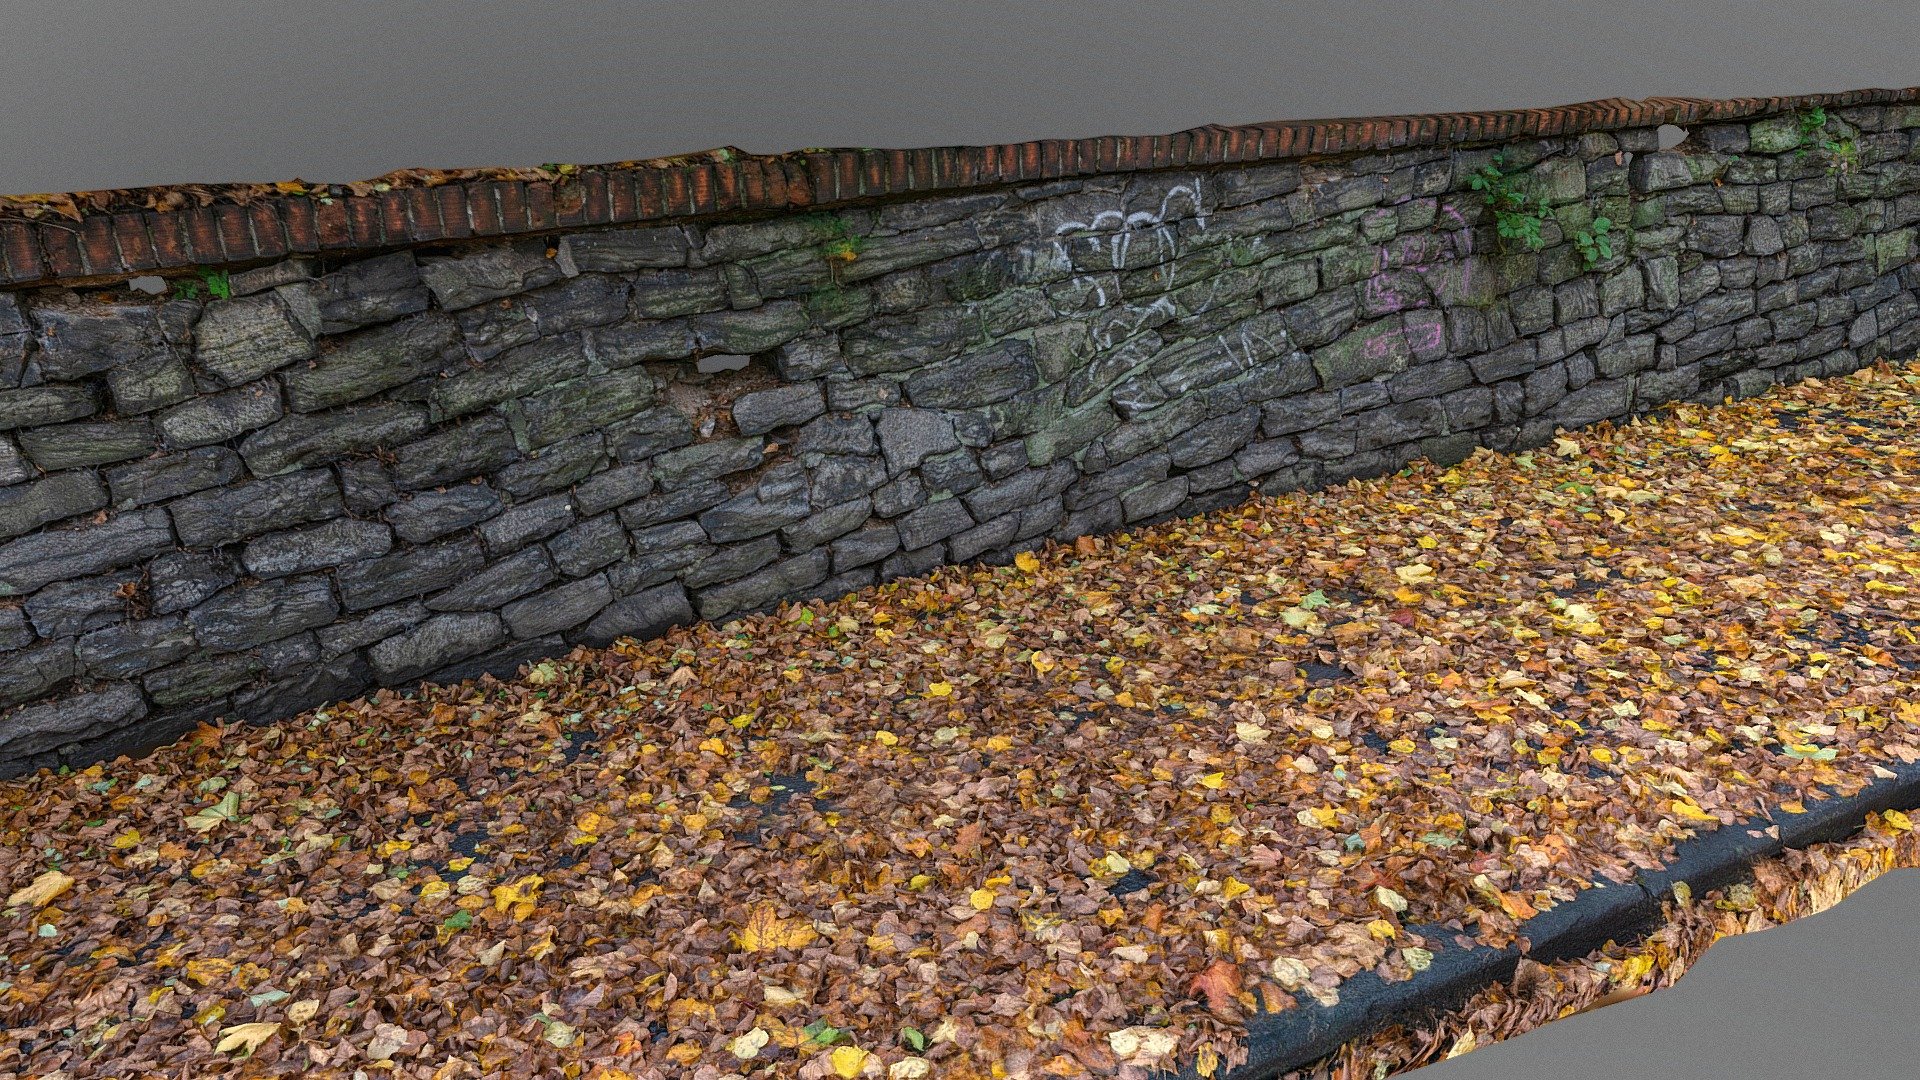 Old pavement way with stone wall covered with autumn fall cherry sakura tree leaves, on asphalt park sidewalk pavement curb

photogrammetry scan 250x24MP, 2x16K texture - Leaf covered sidewalk with stone wall - Buy Royalty Free 3D model by matousekfoto 3d model